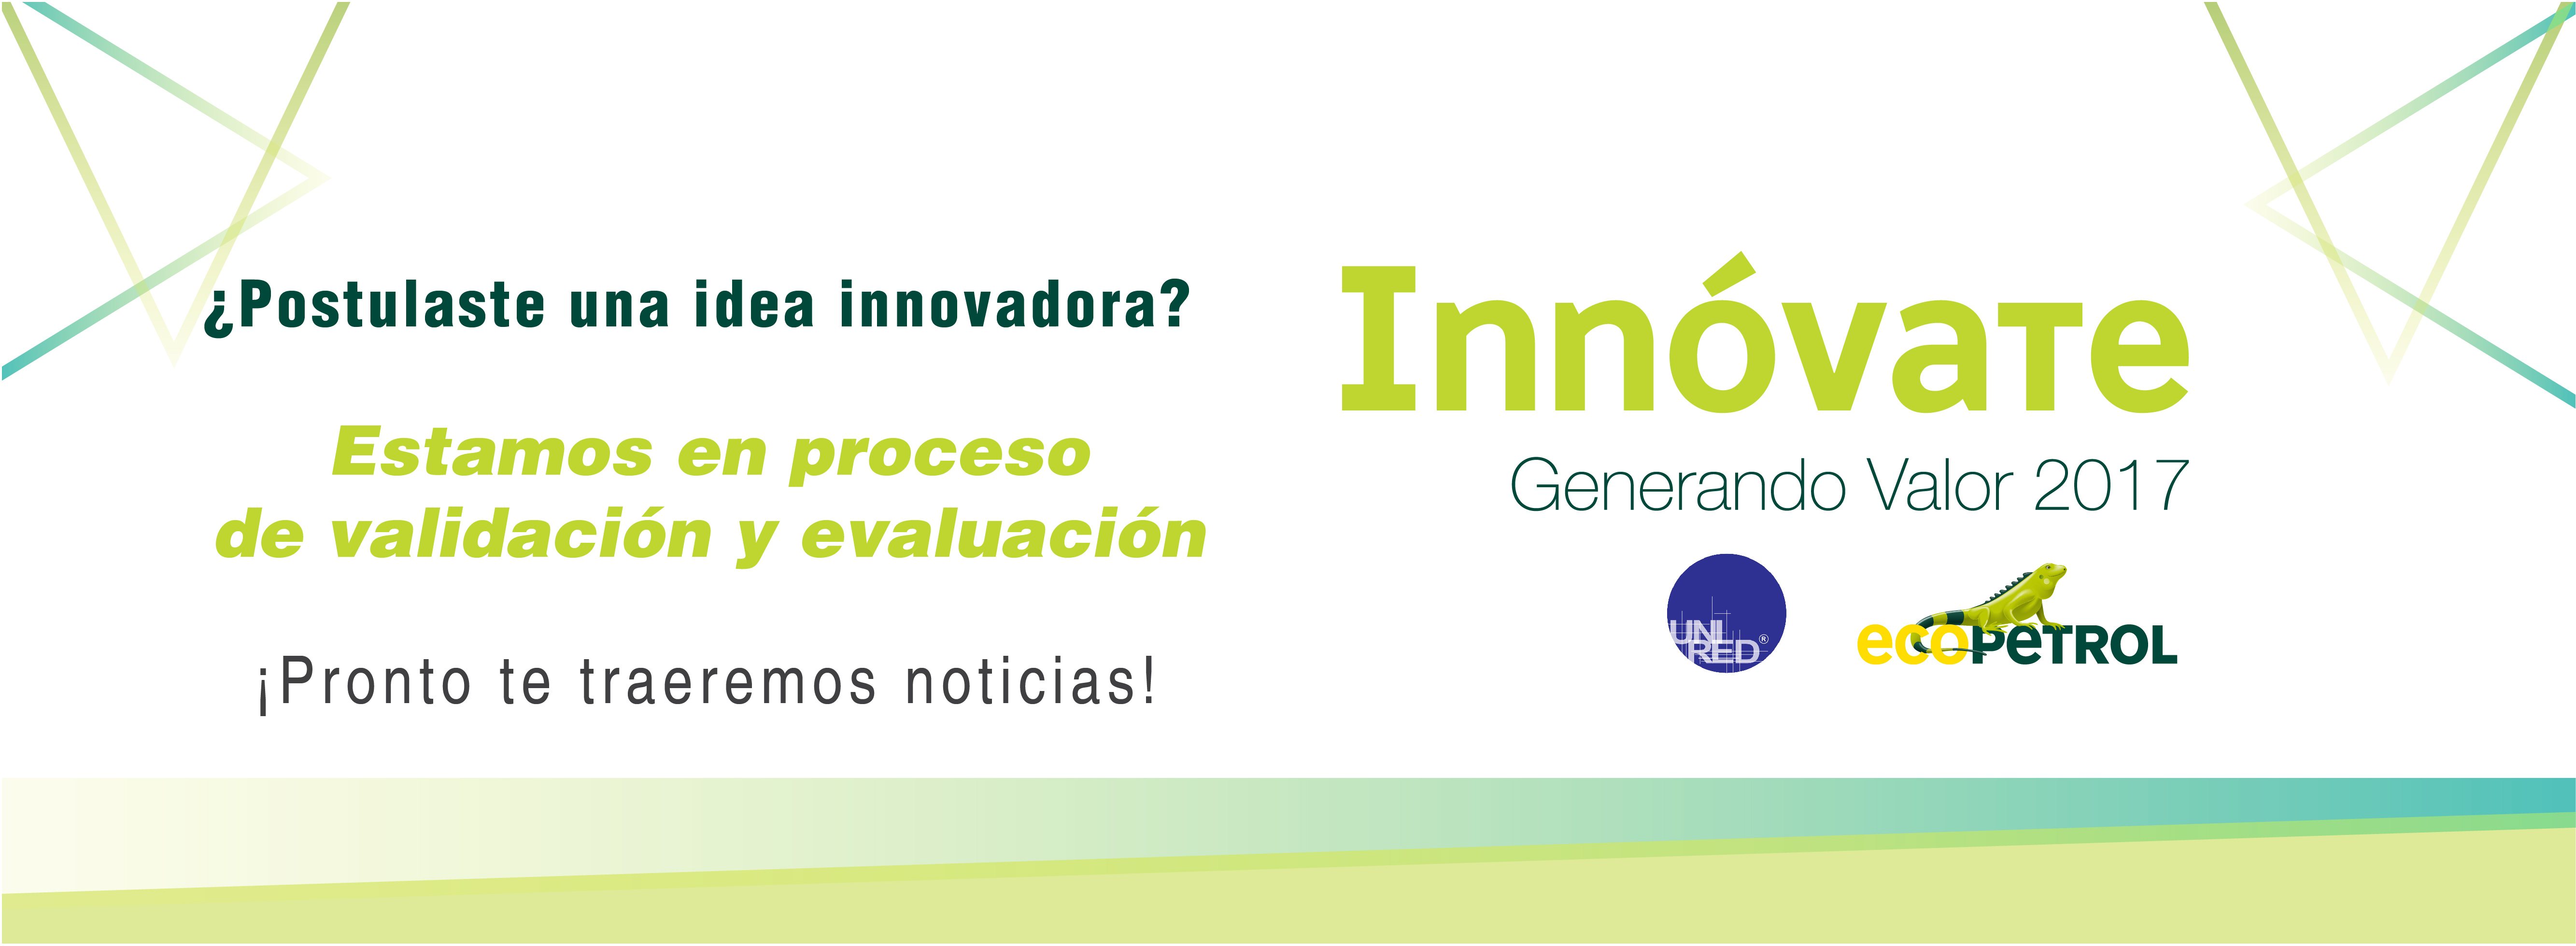 banner innovate validacion requisitos1280x470px